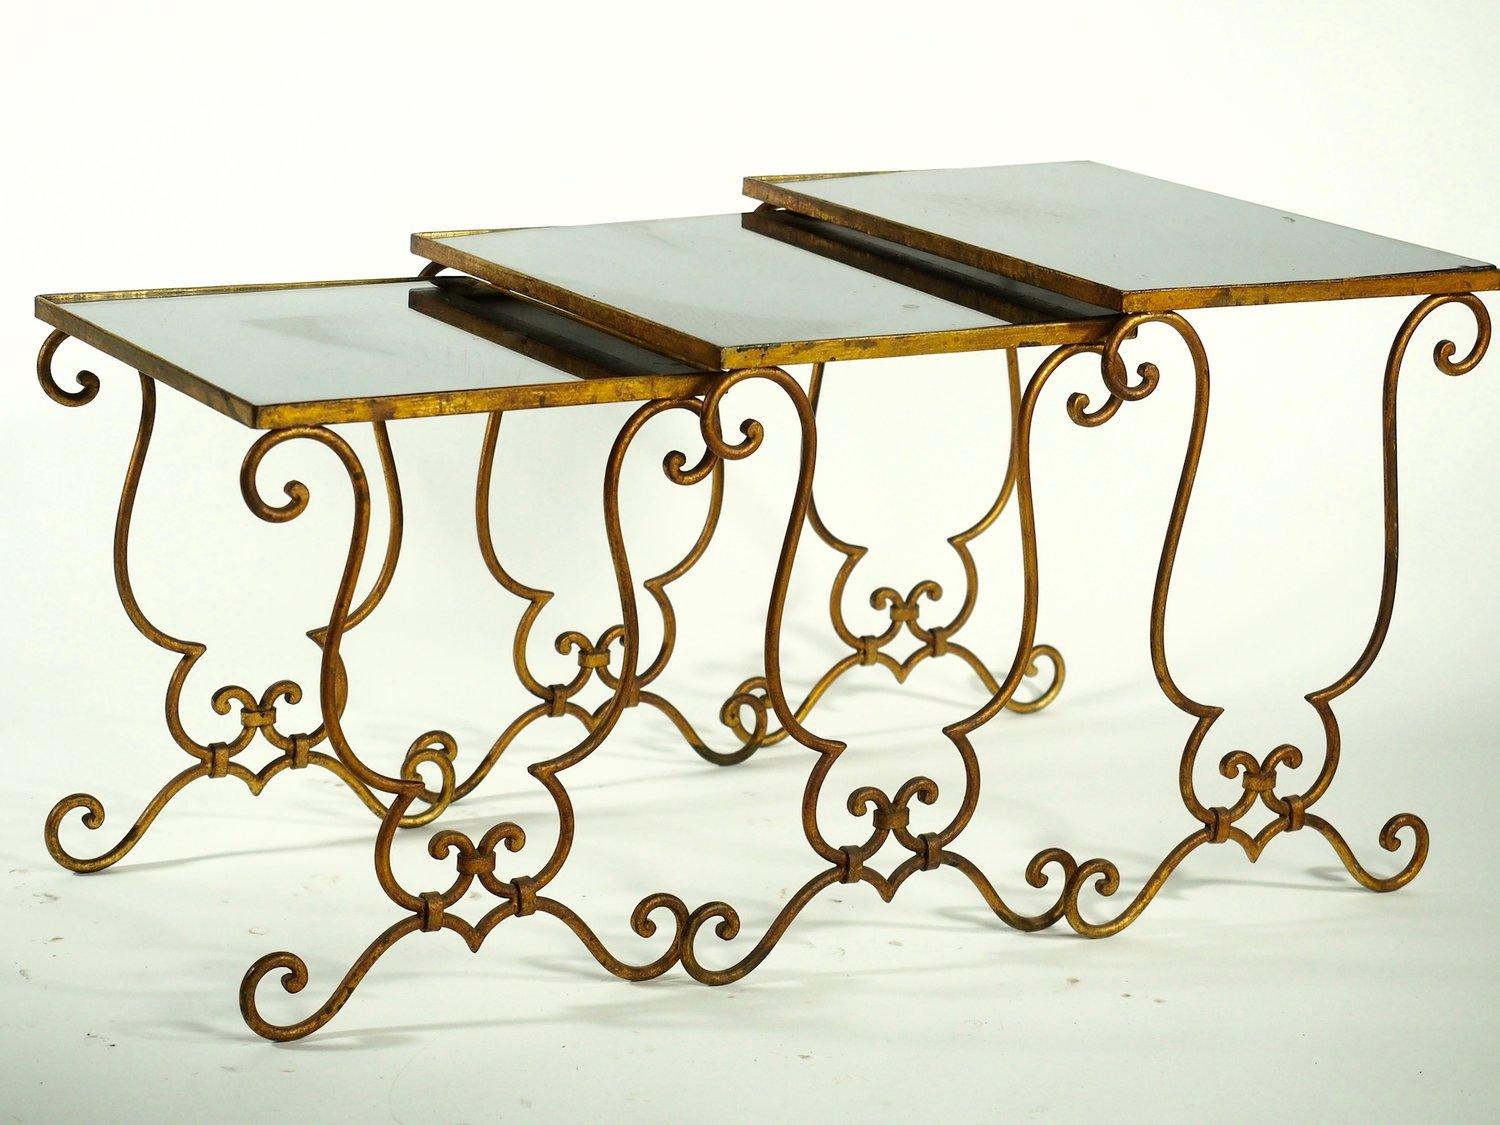 French 1940s Art Deco set of three stack or nesting tables in the style of Jean-Charles Moreux. Gold leafed forged iron with original distressed mirror tops.